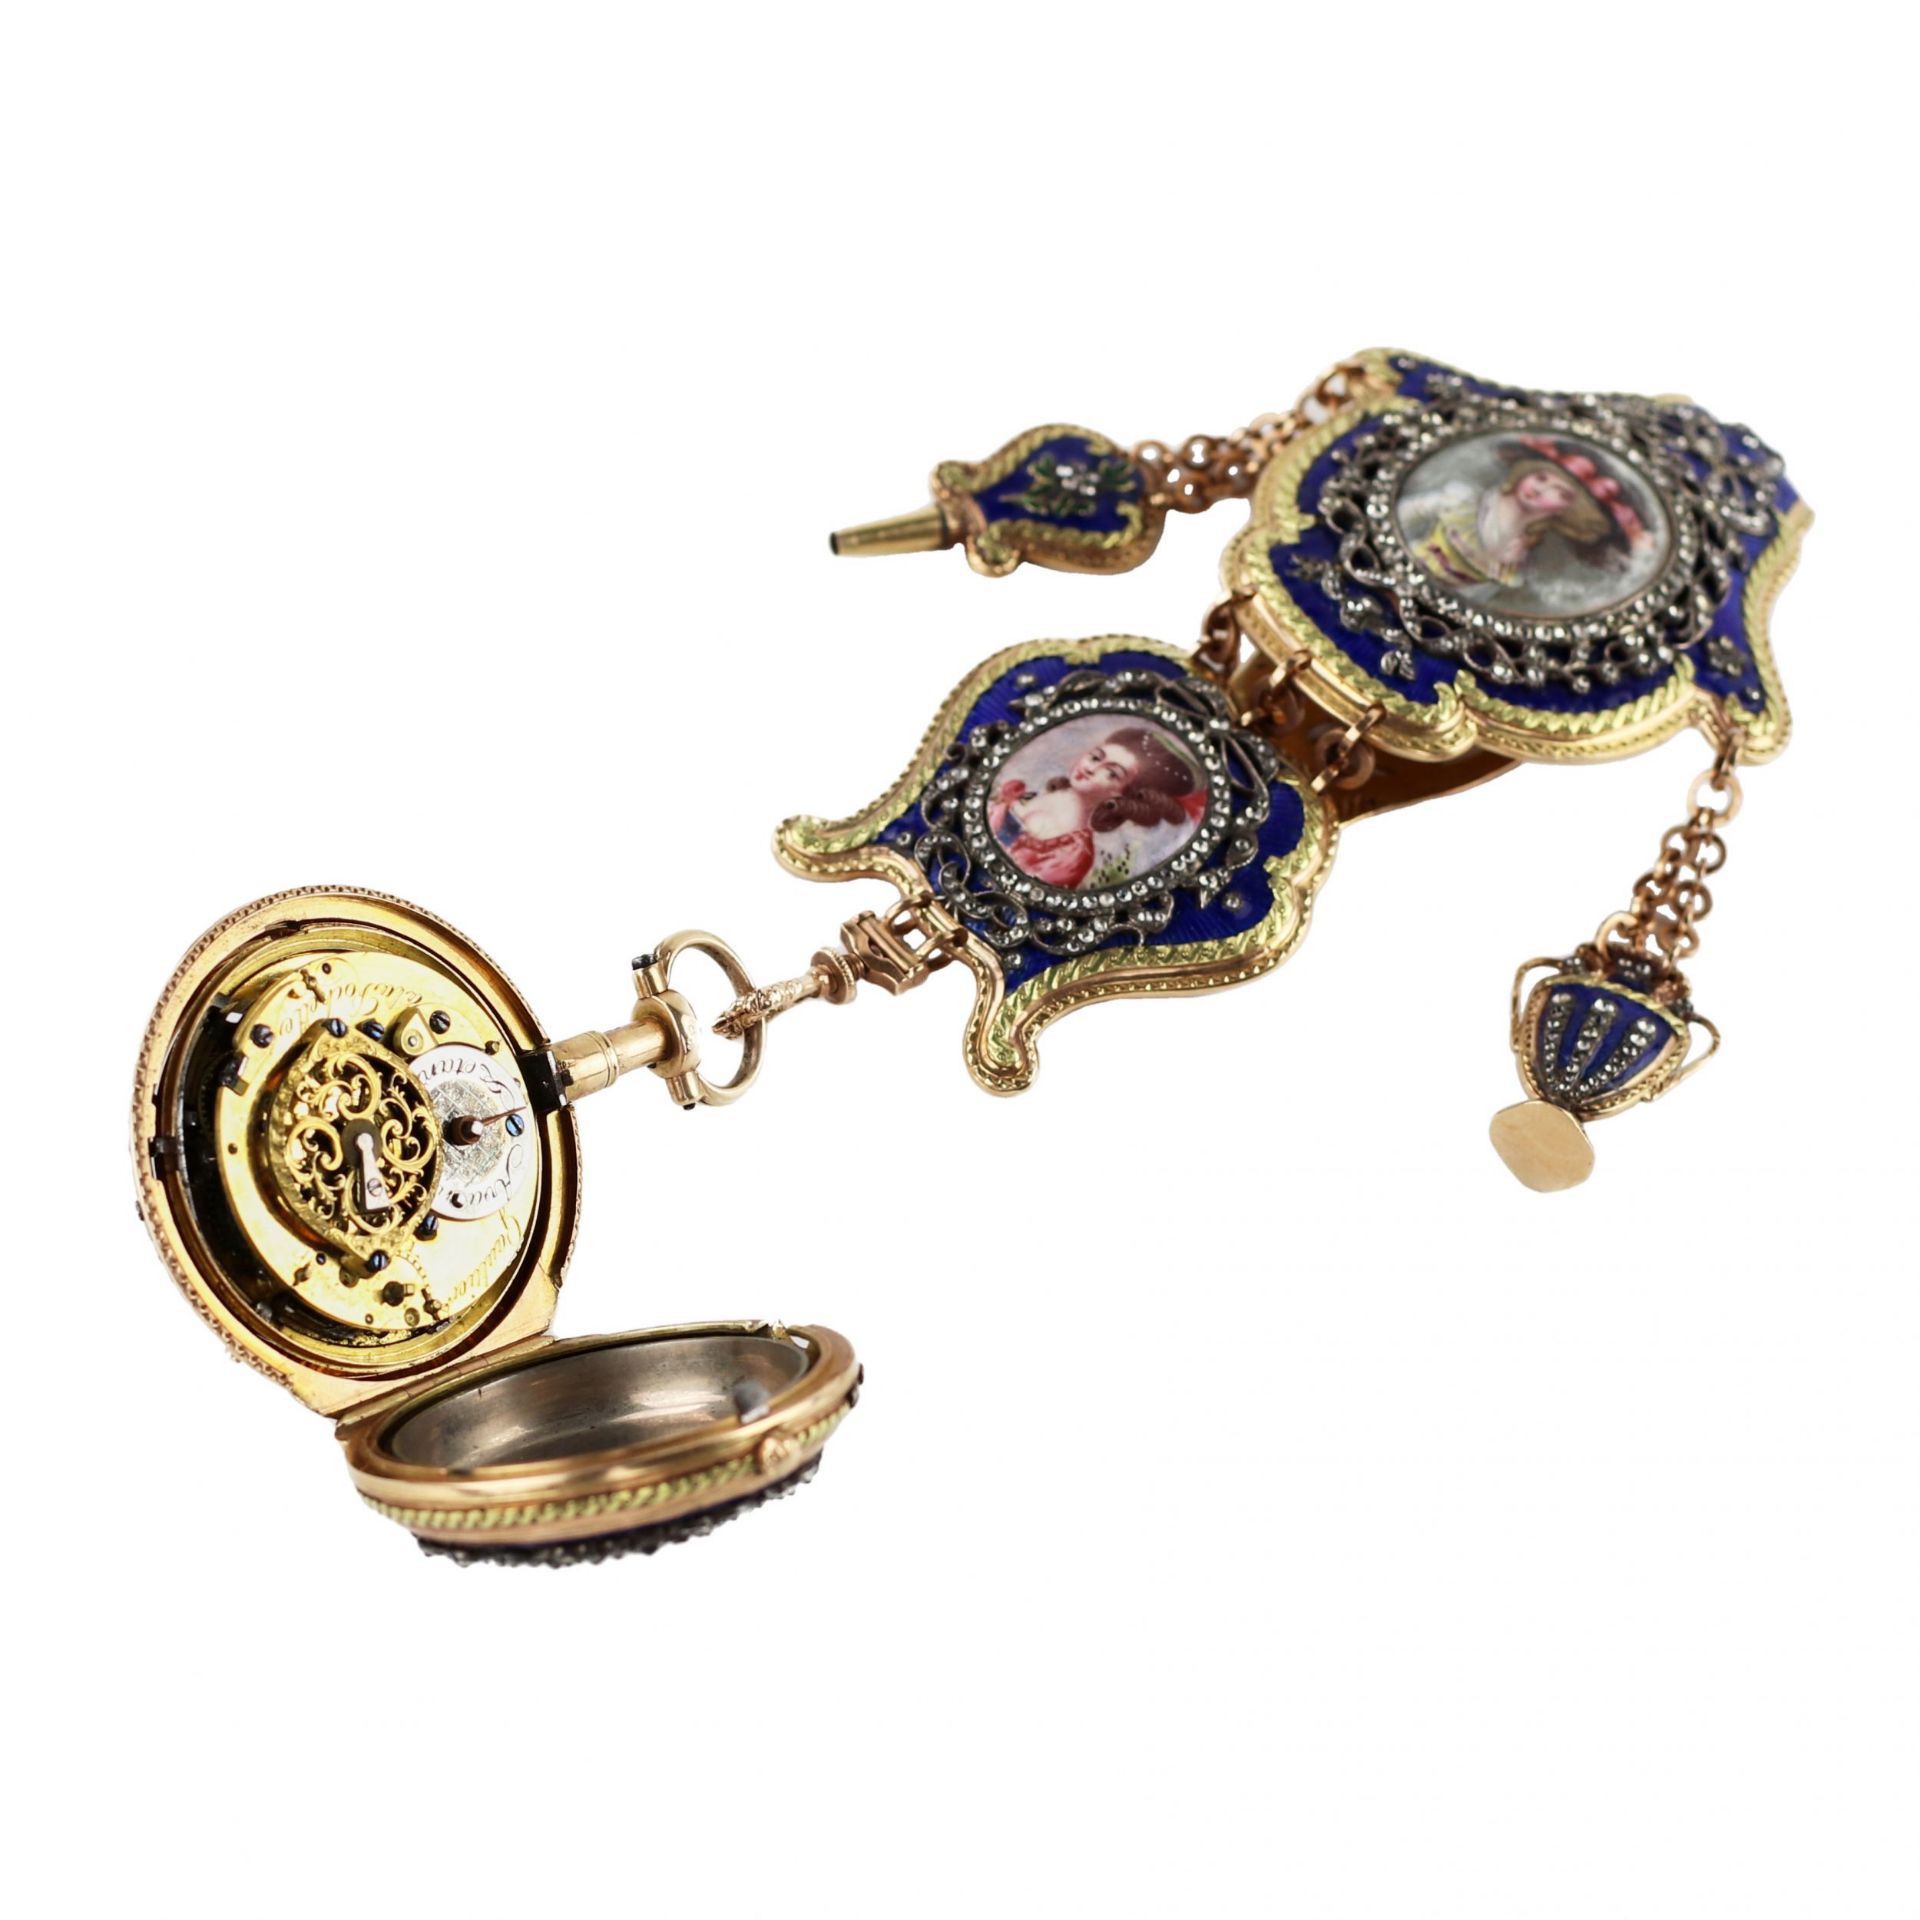 Chatelain with gold pocket watch, diamonds and enamel painting. France 19th century. - Image 3 of 10